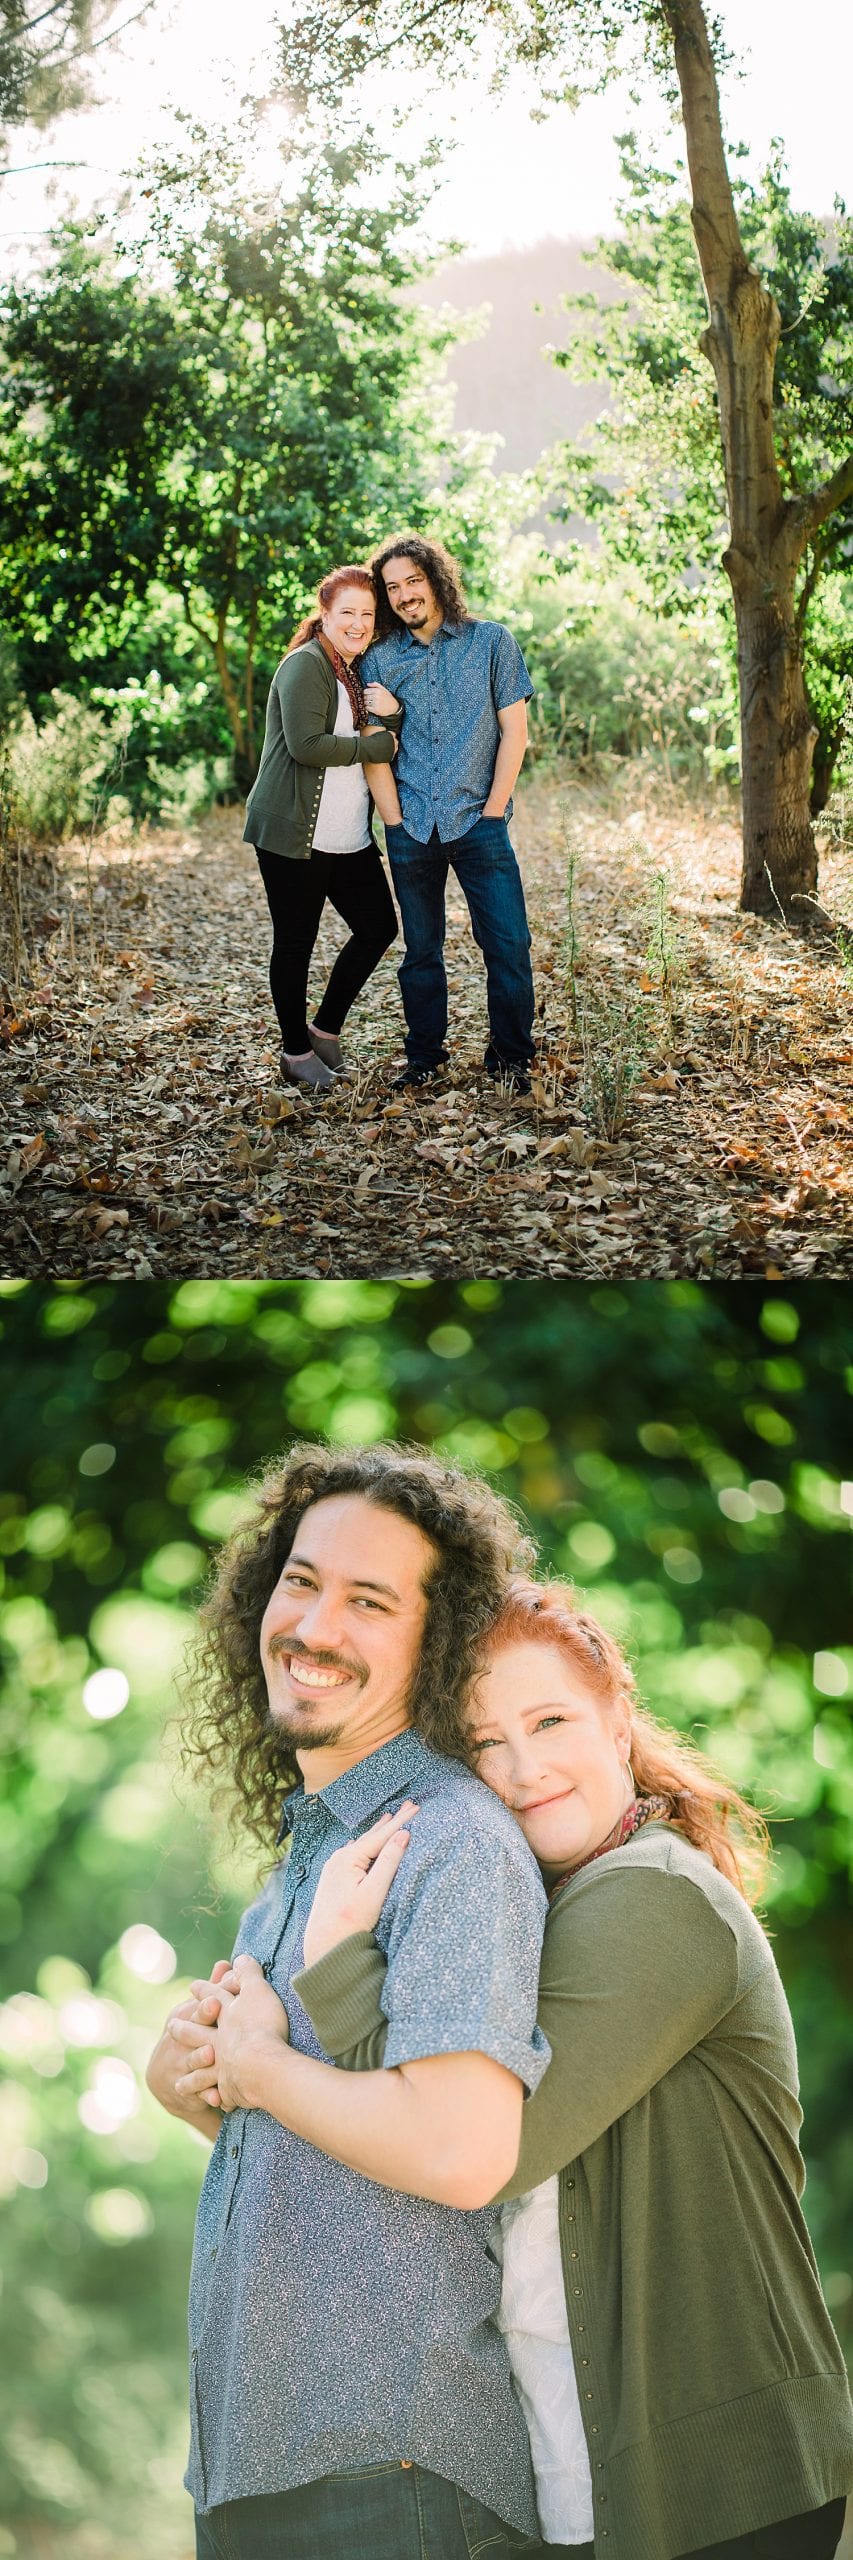 First things first, this Fairview Park sunrise engagement in Costa Mesa was so much fun!